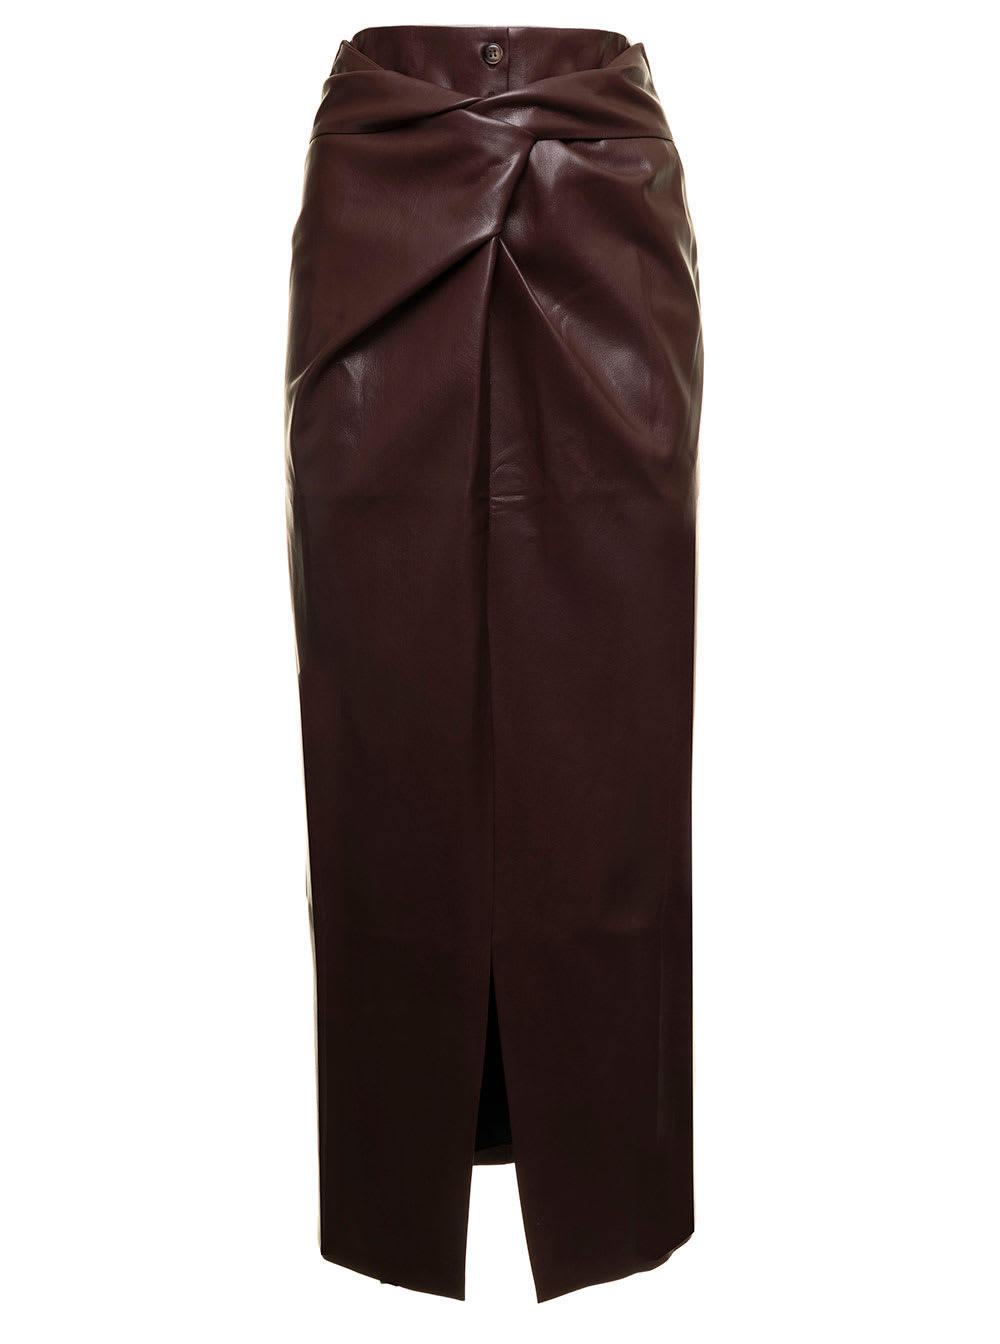 Leane Brown Vegan Leather Skirt With Knotted Detail Nanushka Woman